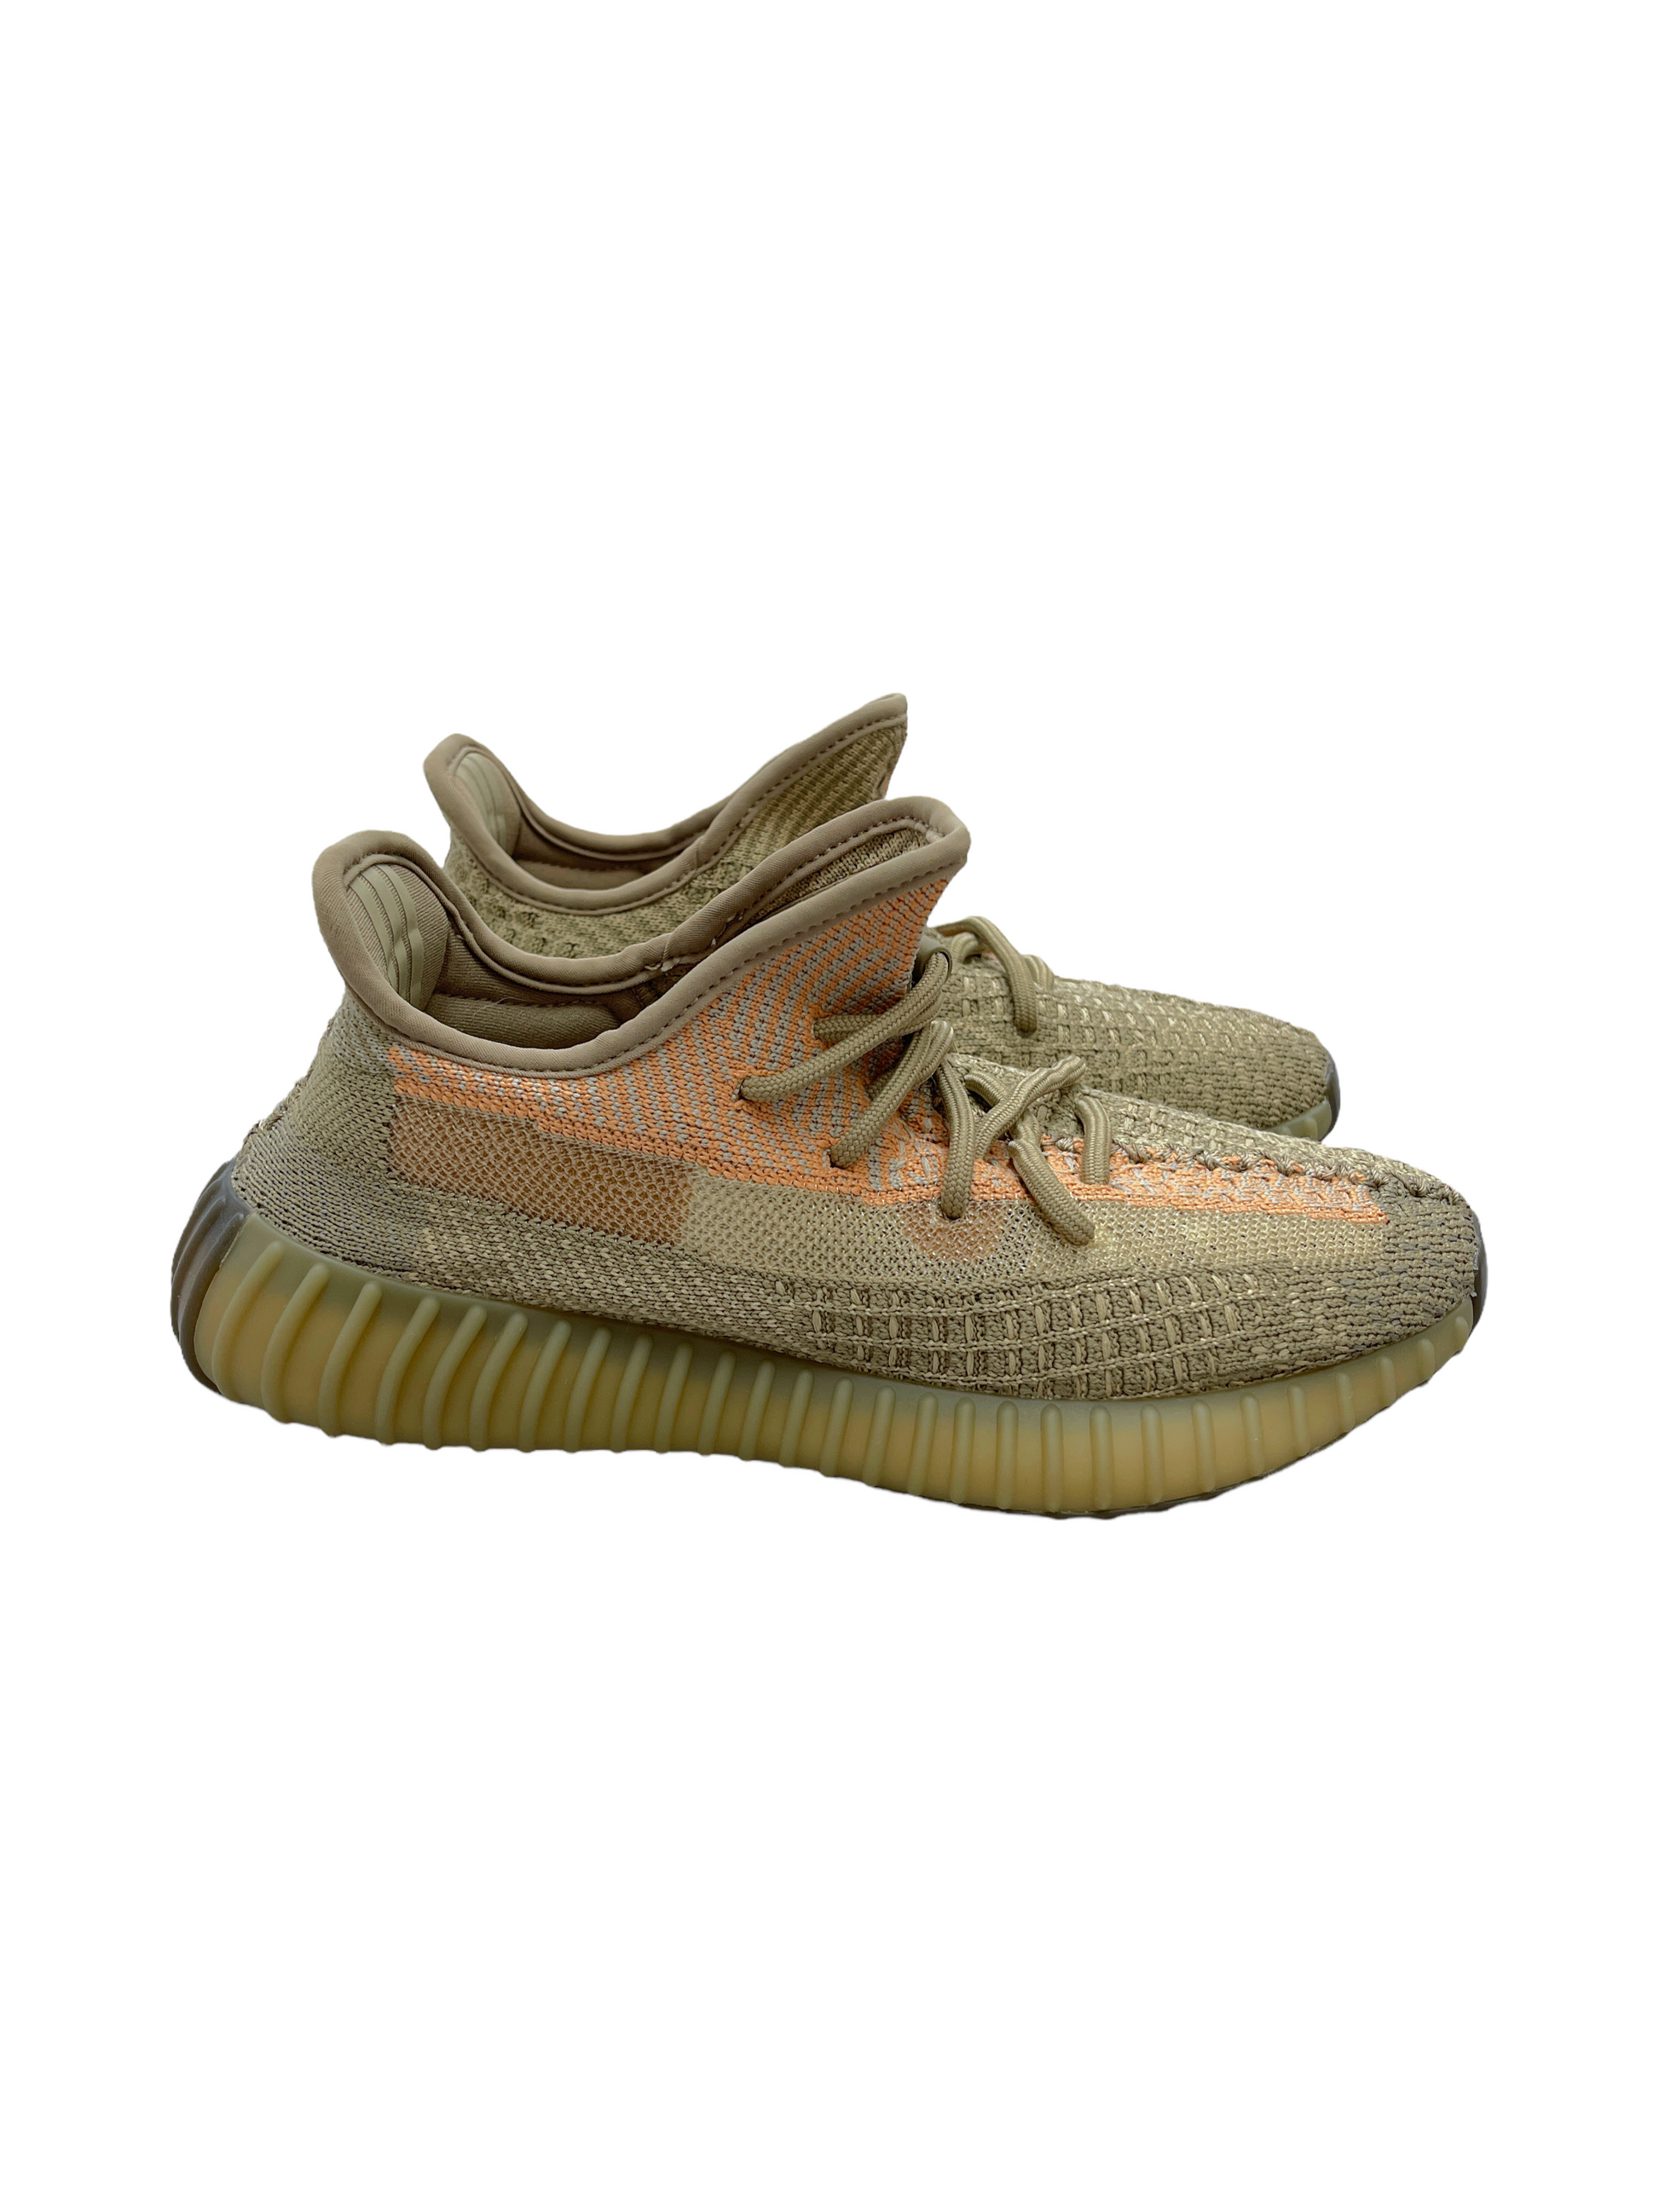 Adidas Yeezy 350 v2 Sand Taupe Sneakers - Genuine Design Luxury Consignment for Men. New & Pre-Owned Clothing, Shoes, & Accessories. Calgary, Canada